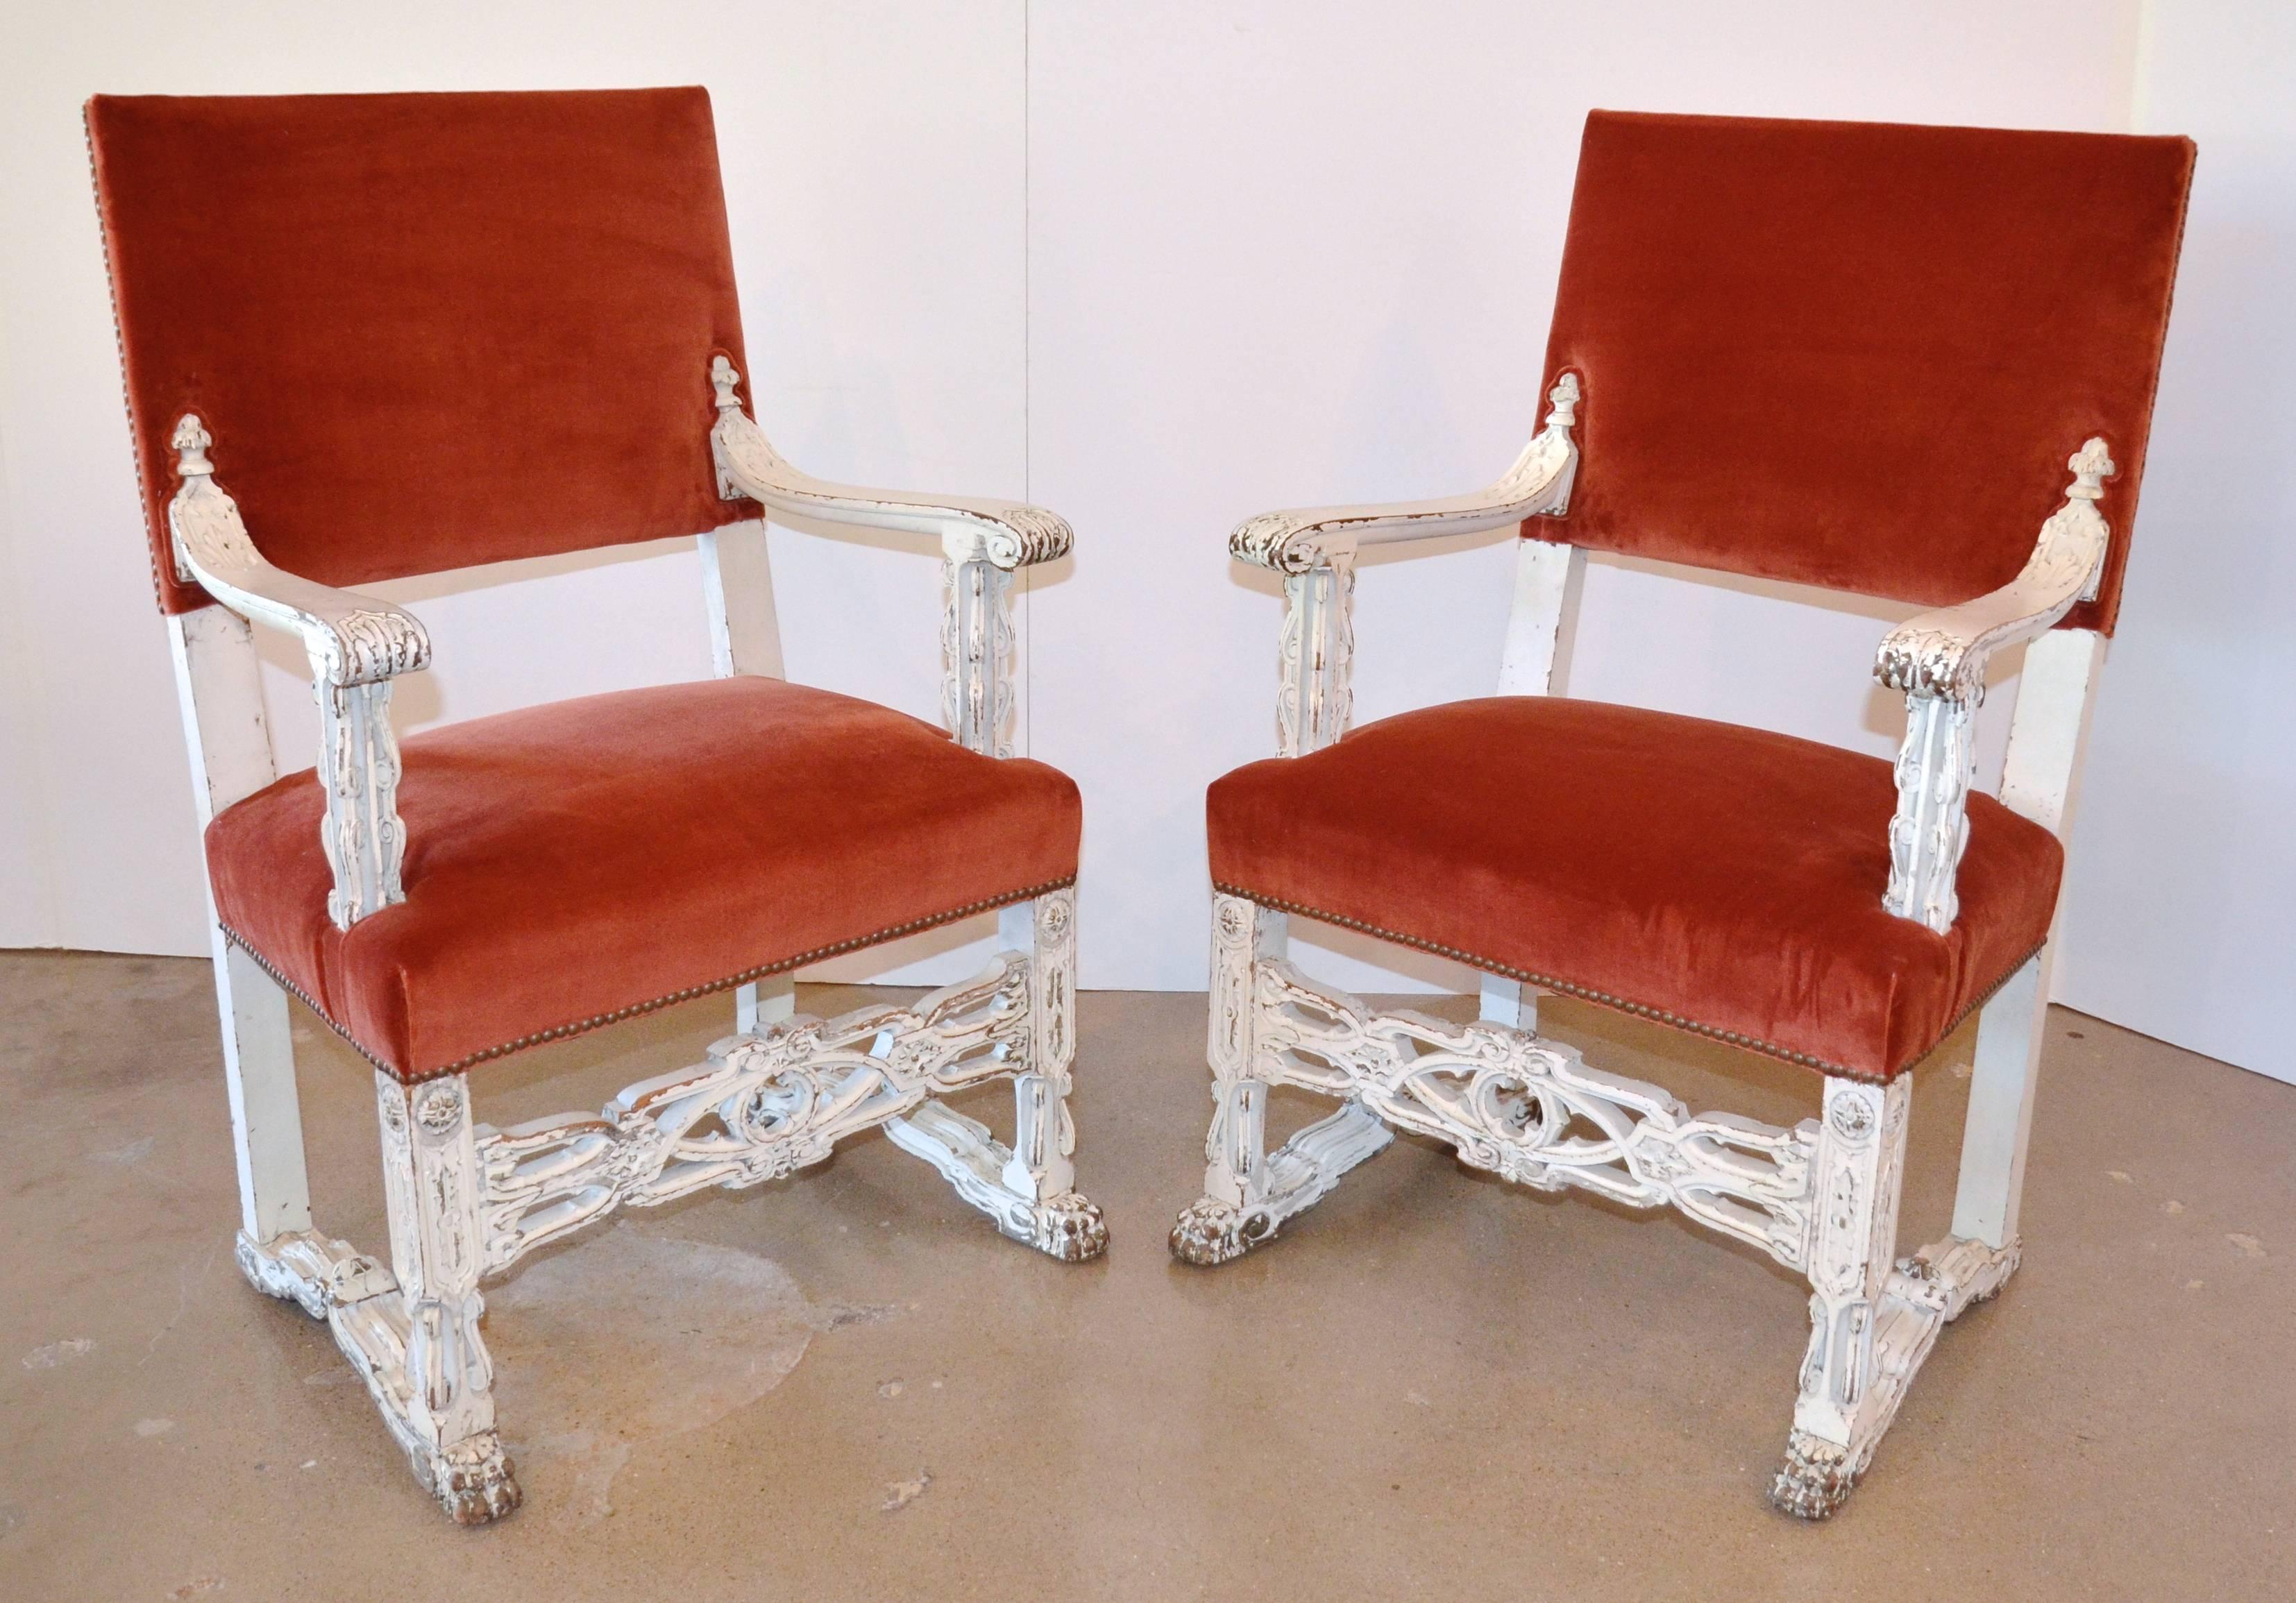 Neo-Gothic or Victorian Gothic styling on painted white, high-backed armchairs. Seat and back are newly upholstered in a rust velvet with brass nailheads, while the patinated white finish blends well with Gustavian settings. This pair make excellent